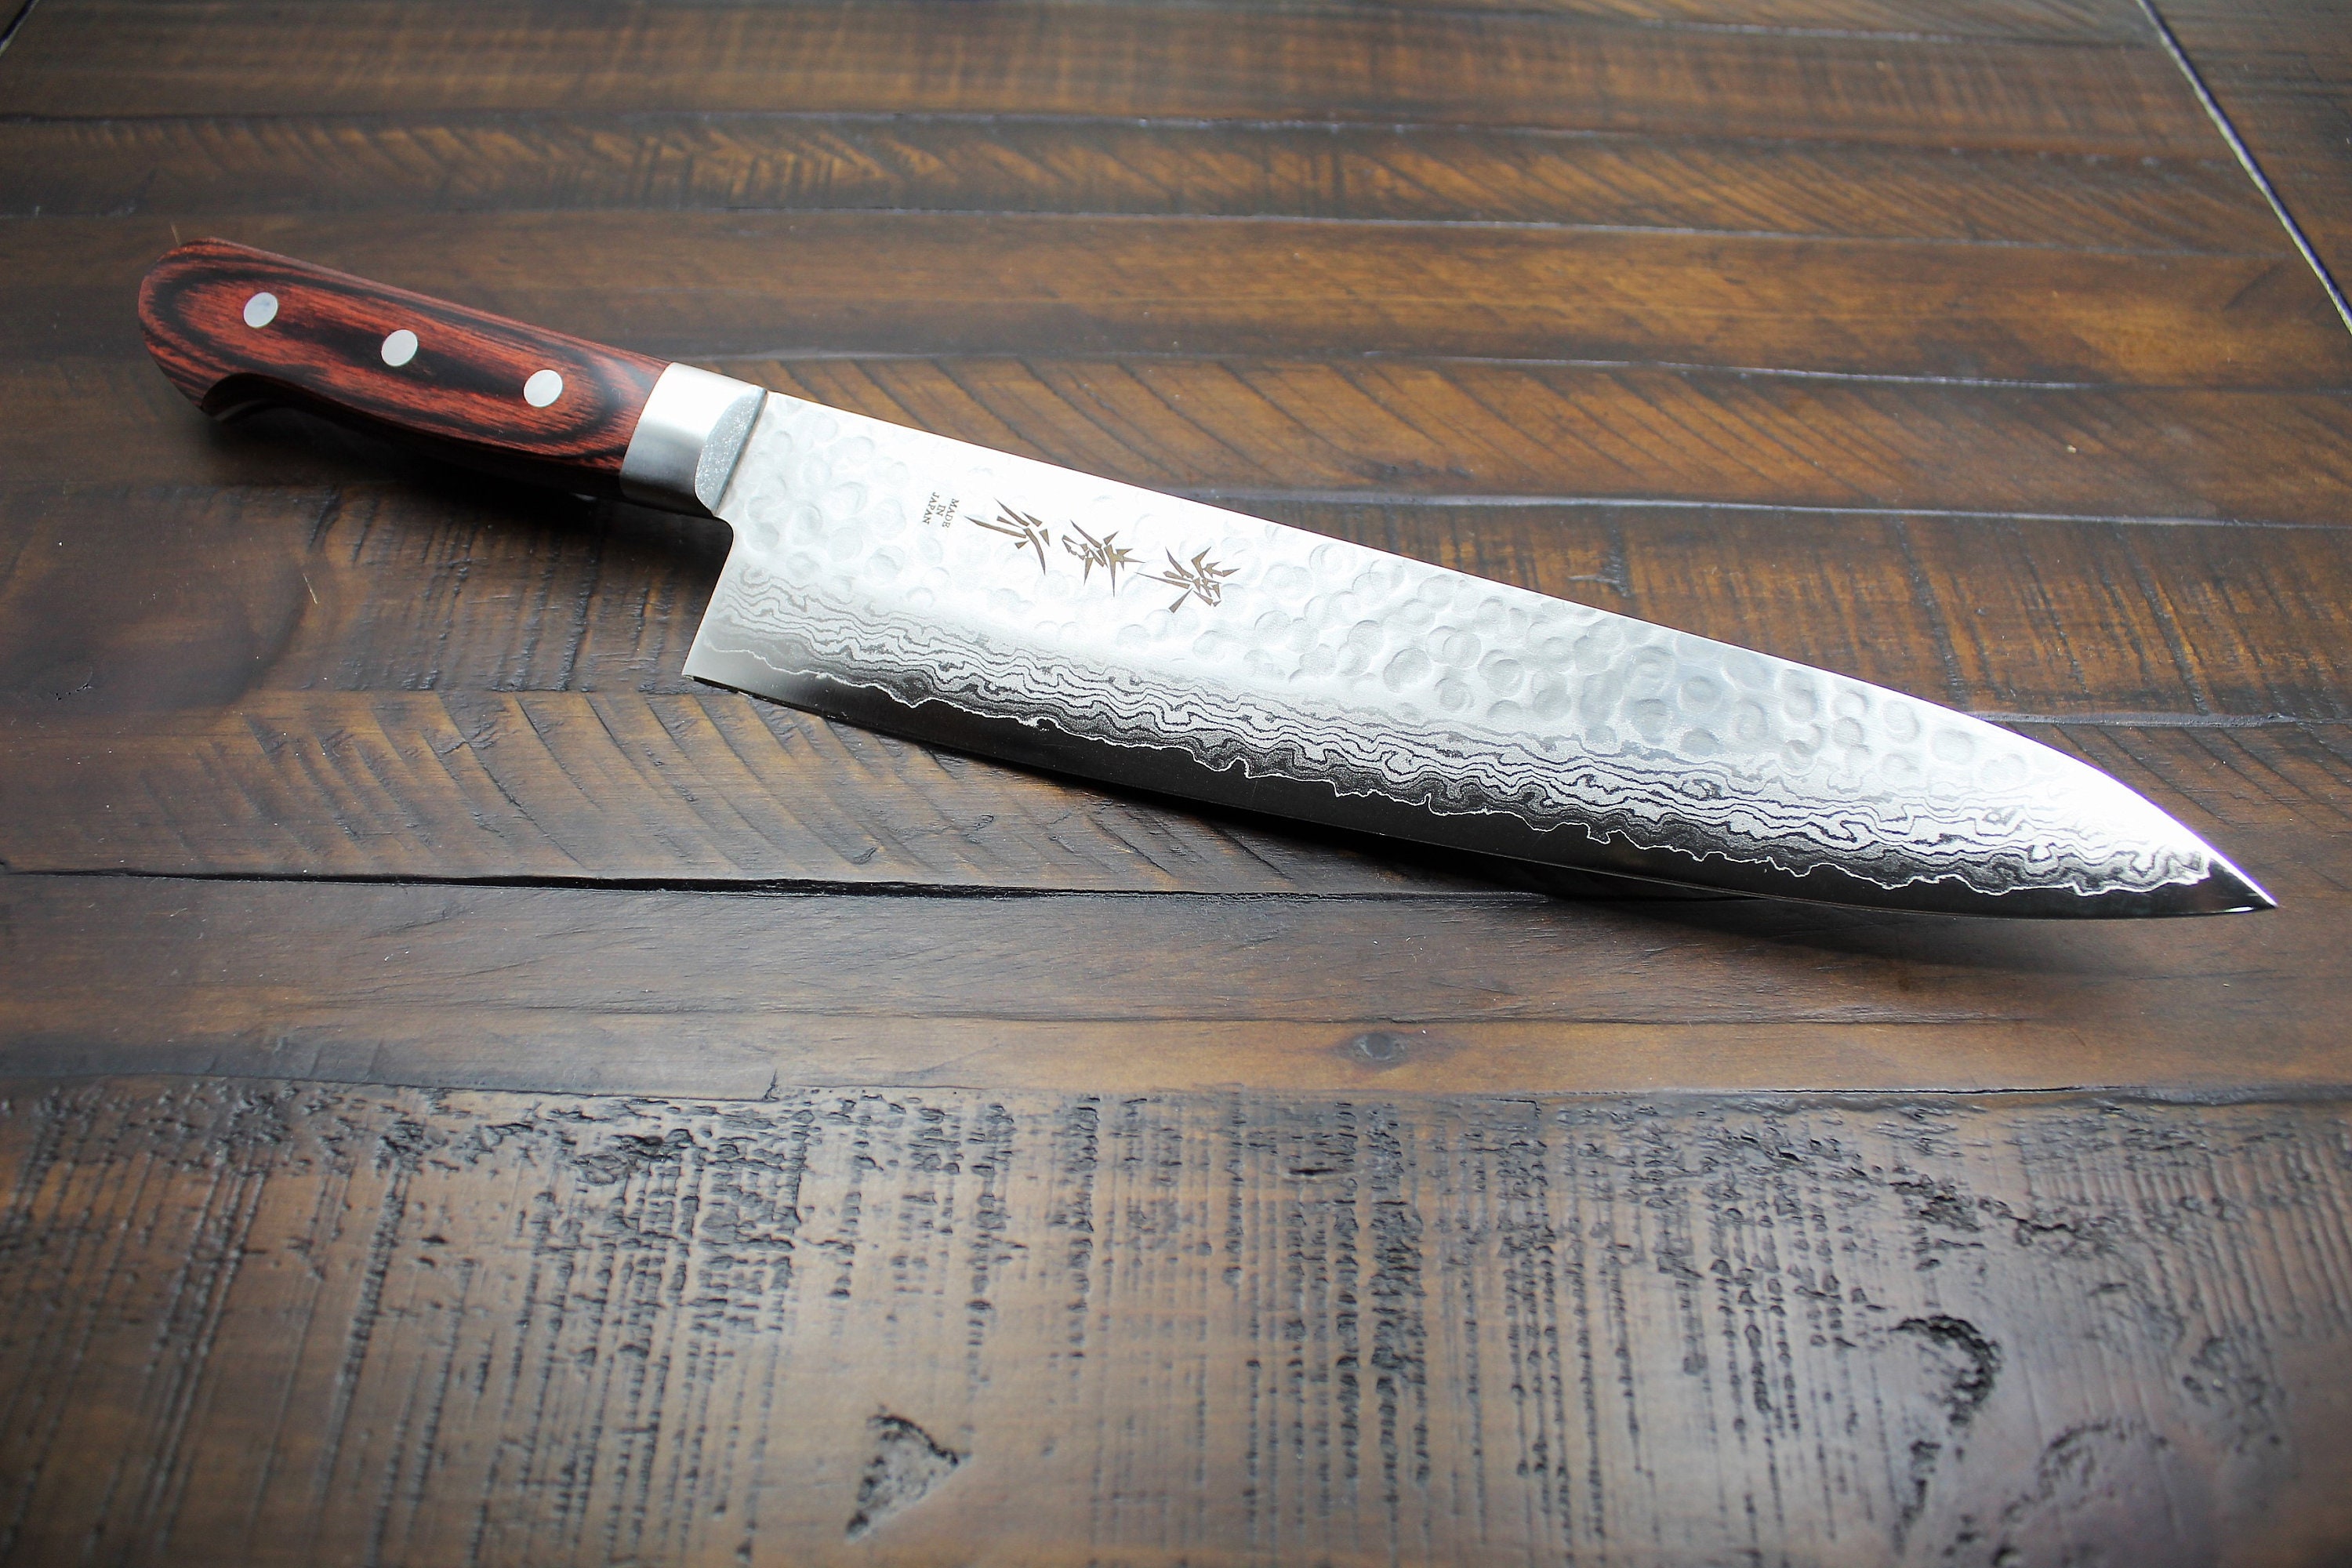 8.2 Inch Chef's Knife 67 Layers Japanese Damascus Kitchen Knife